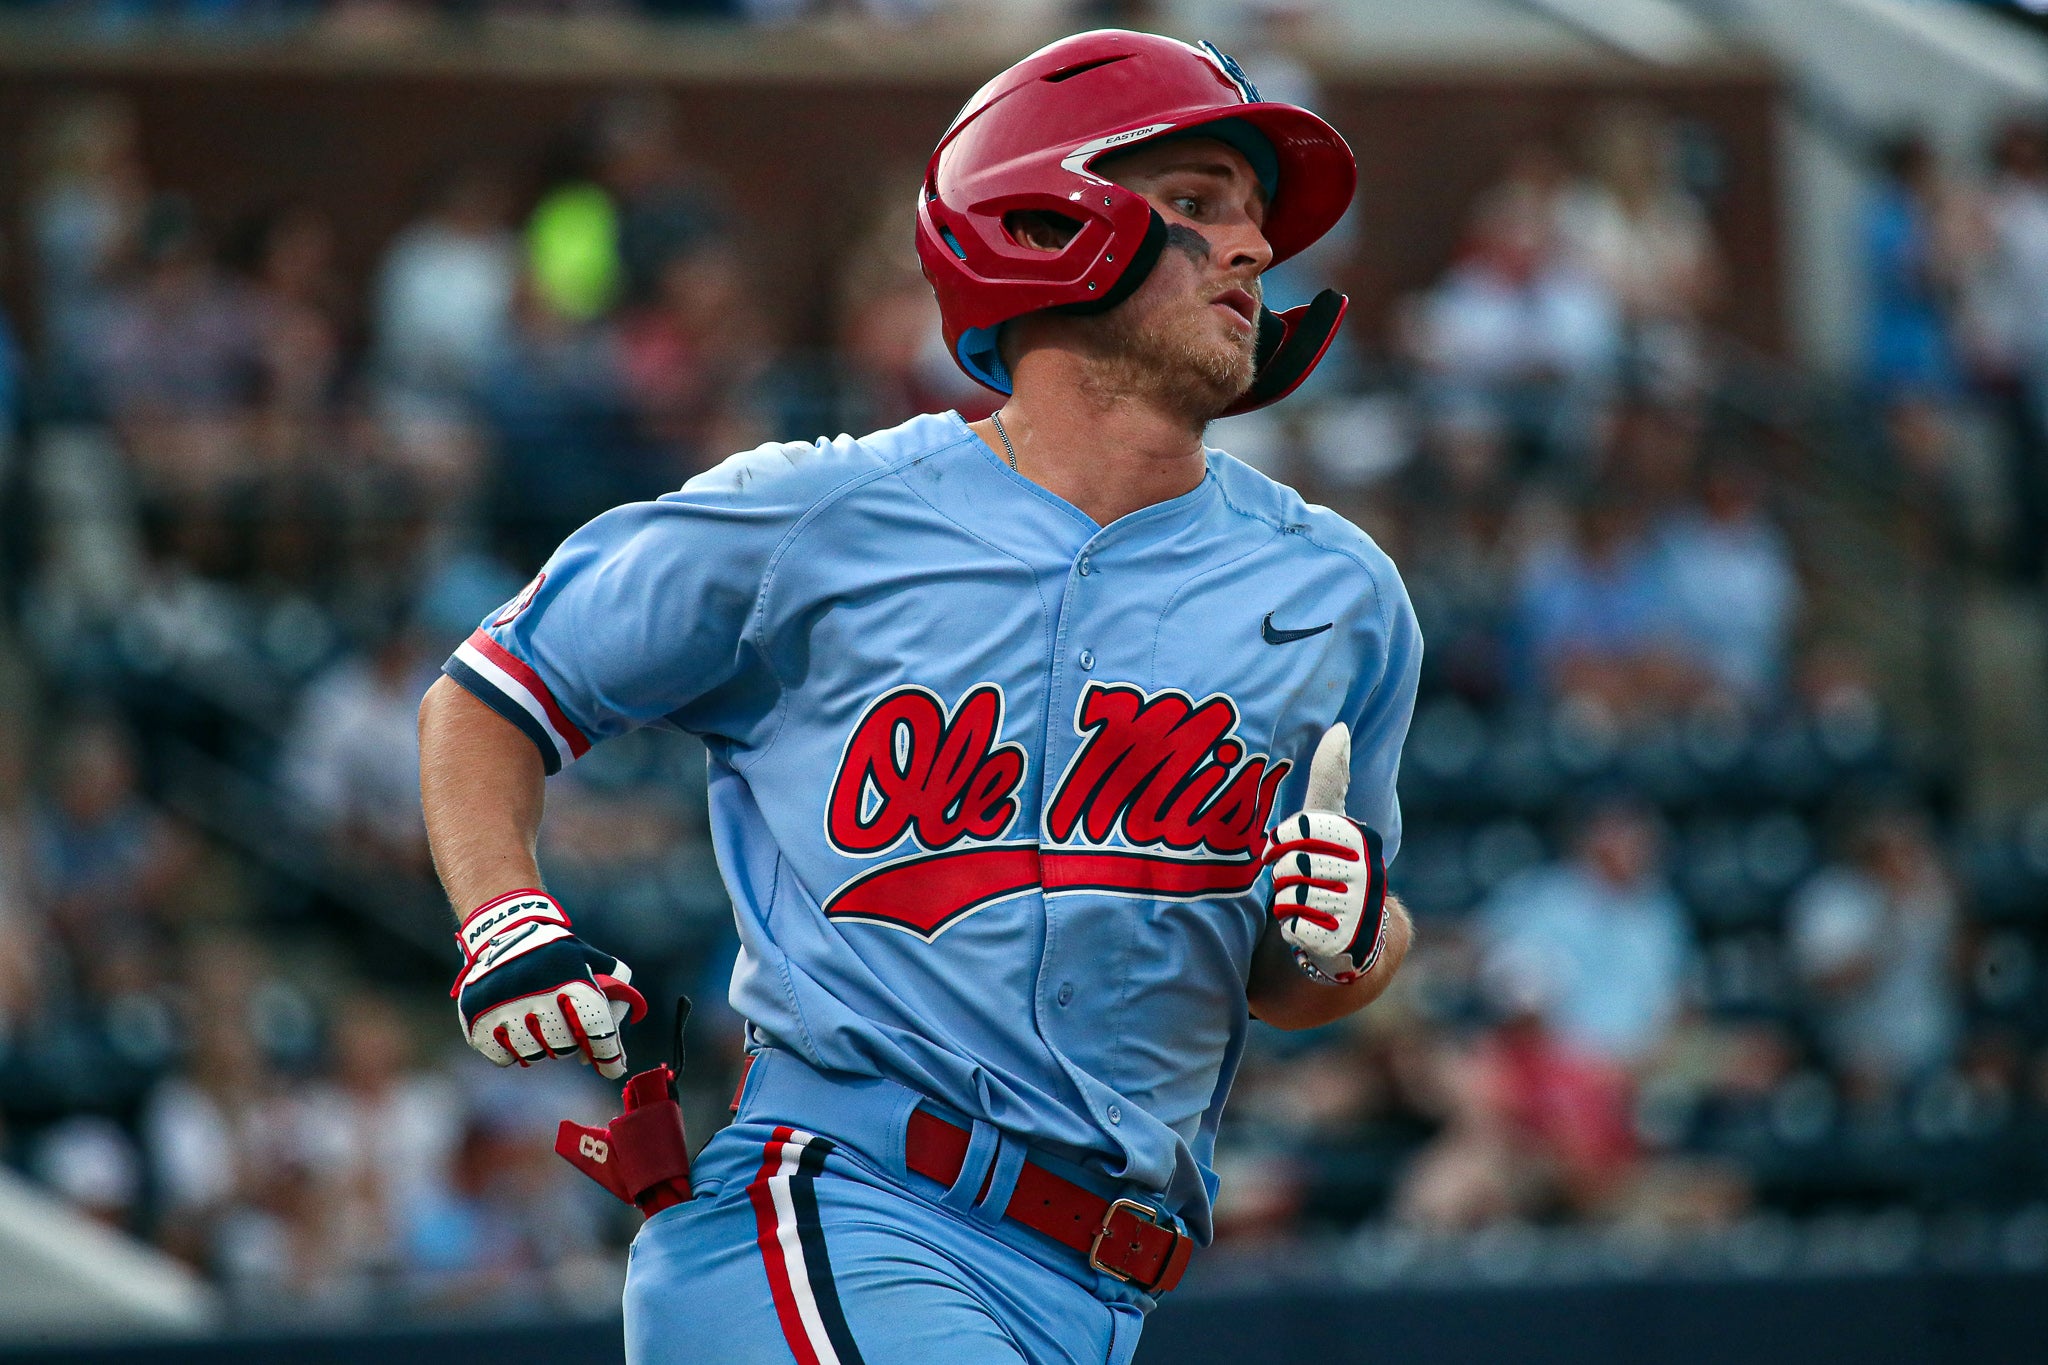 Ole Miss baseball game at Arkansas State cancelled - The Oxford Eagle